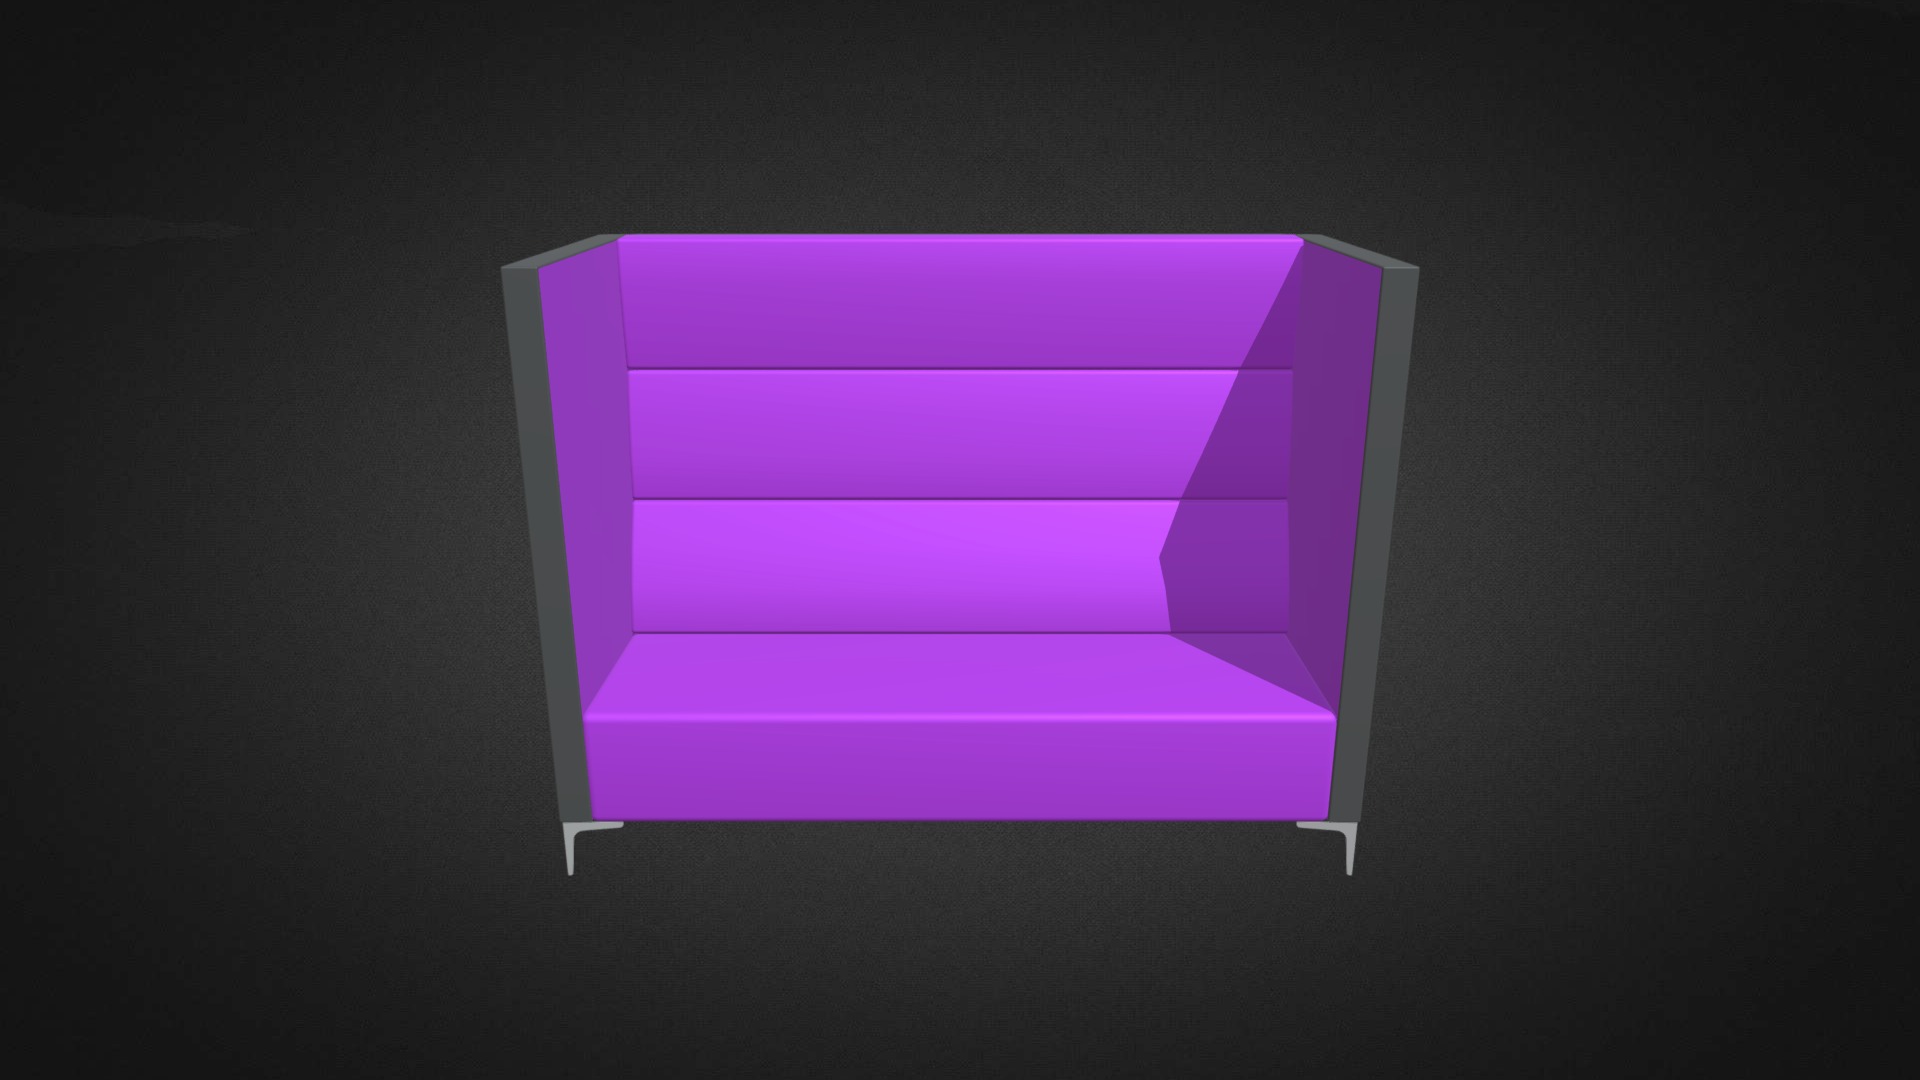 3D model Huddle 3 Seater Hire - This is a 3D model of the Huddle 3 Seater Hire. The 3D model is about a purple square box.